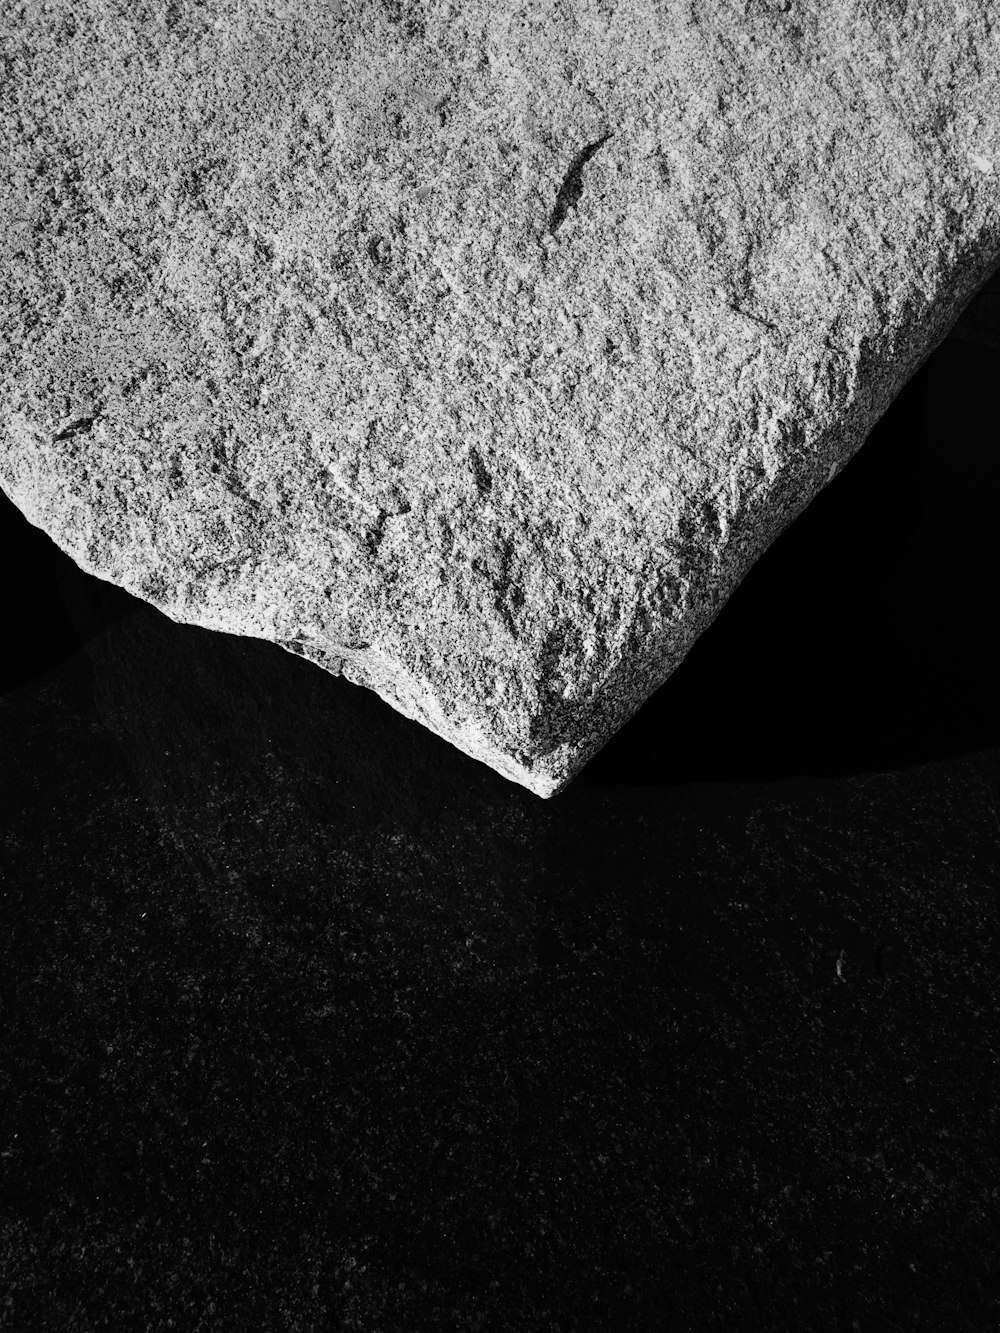 a black and white photo of a rock